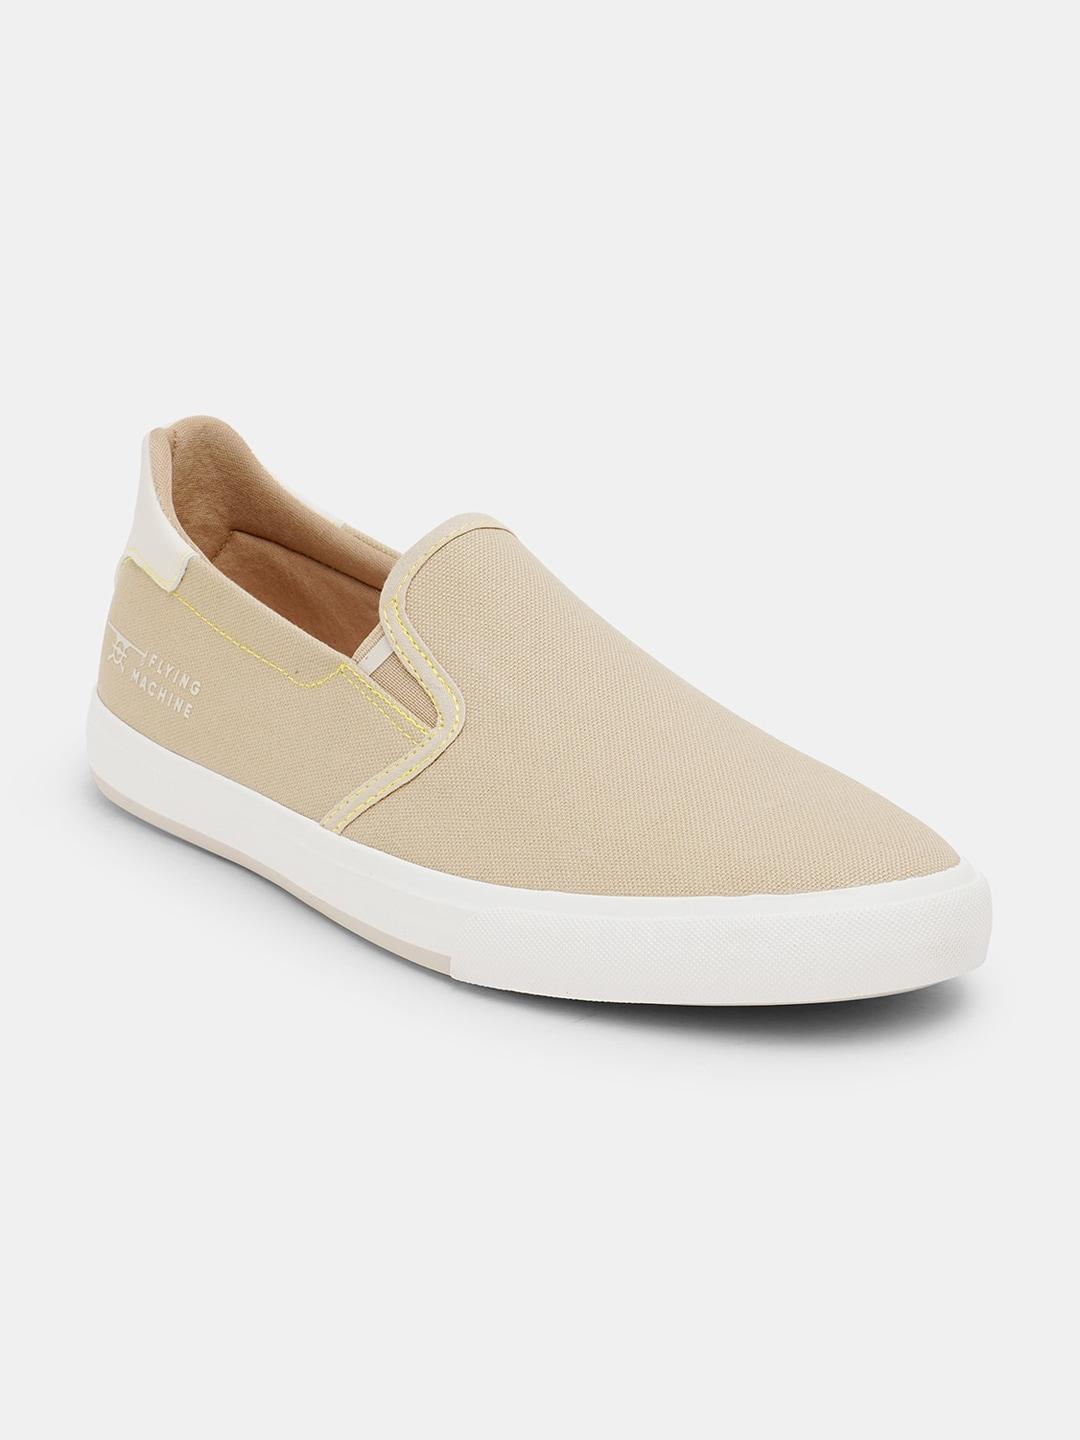 flying-machine-men-comfort-insole-canvas-contrast-sole-slip-on-sneakers